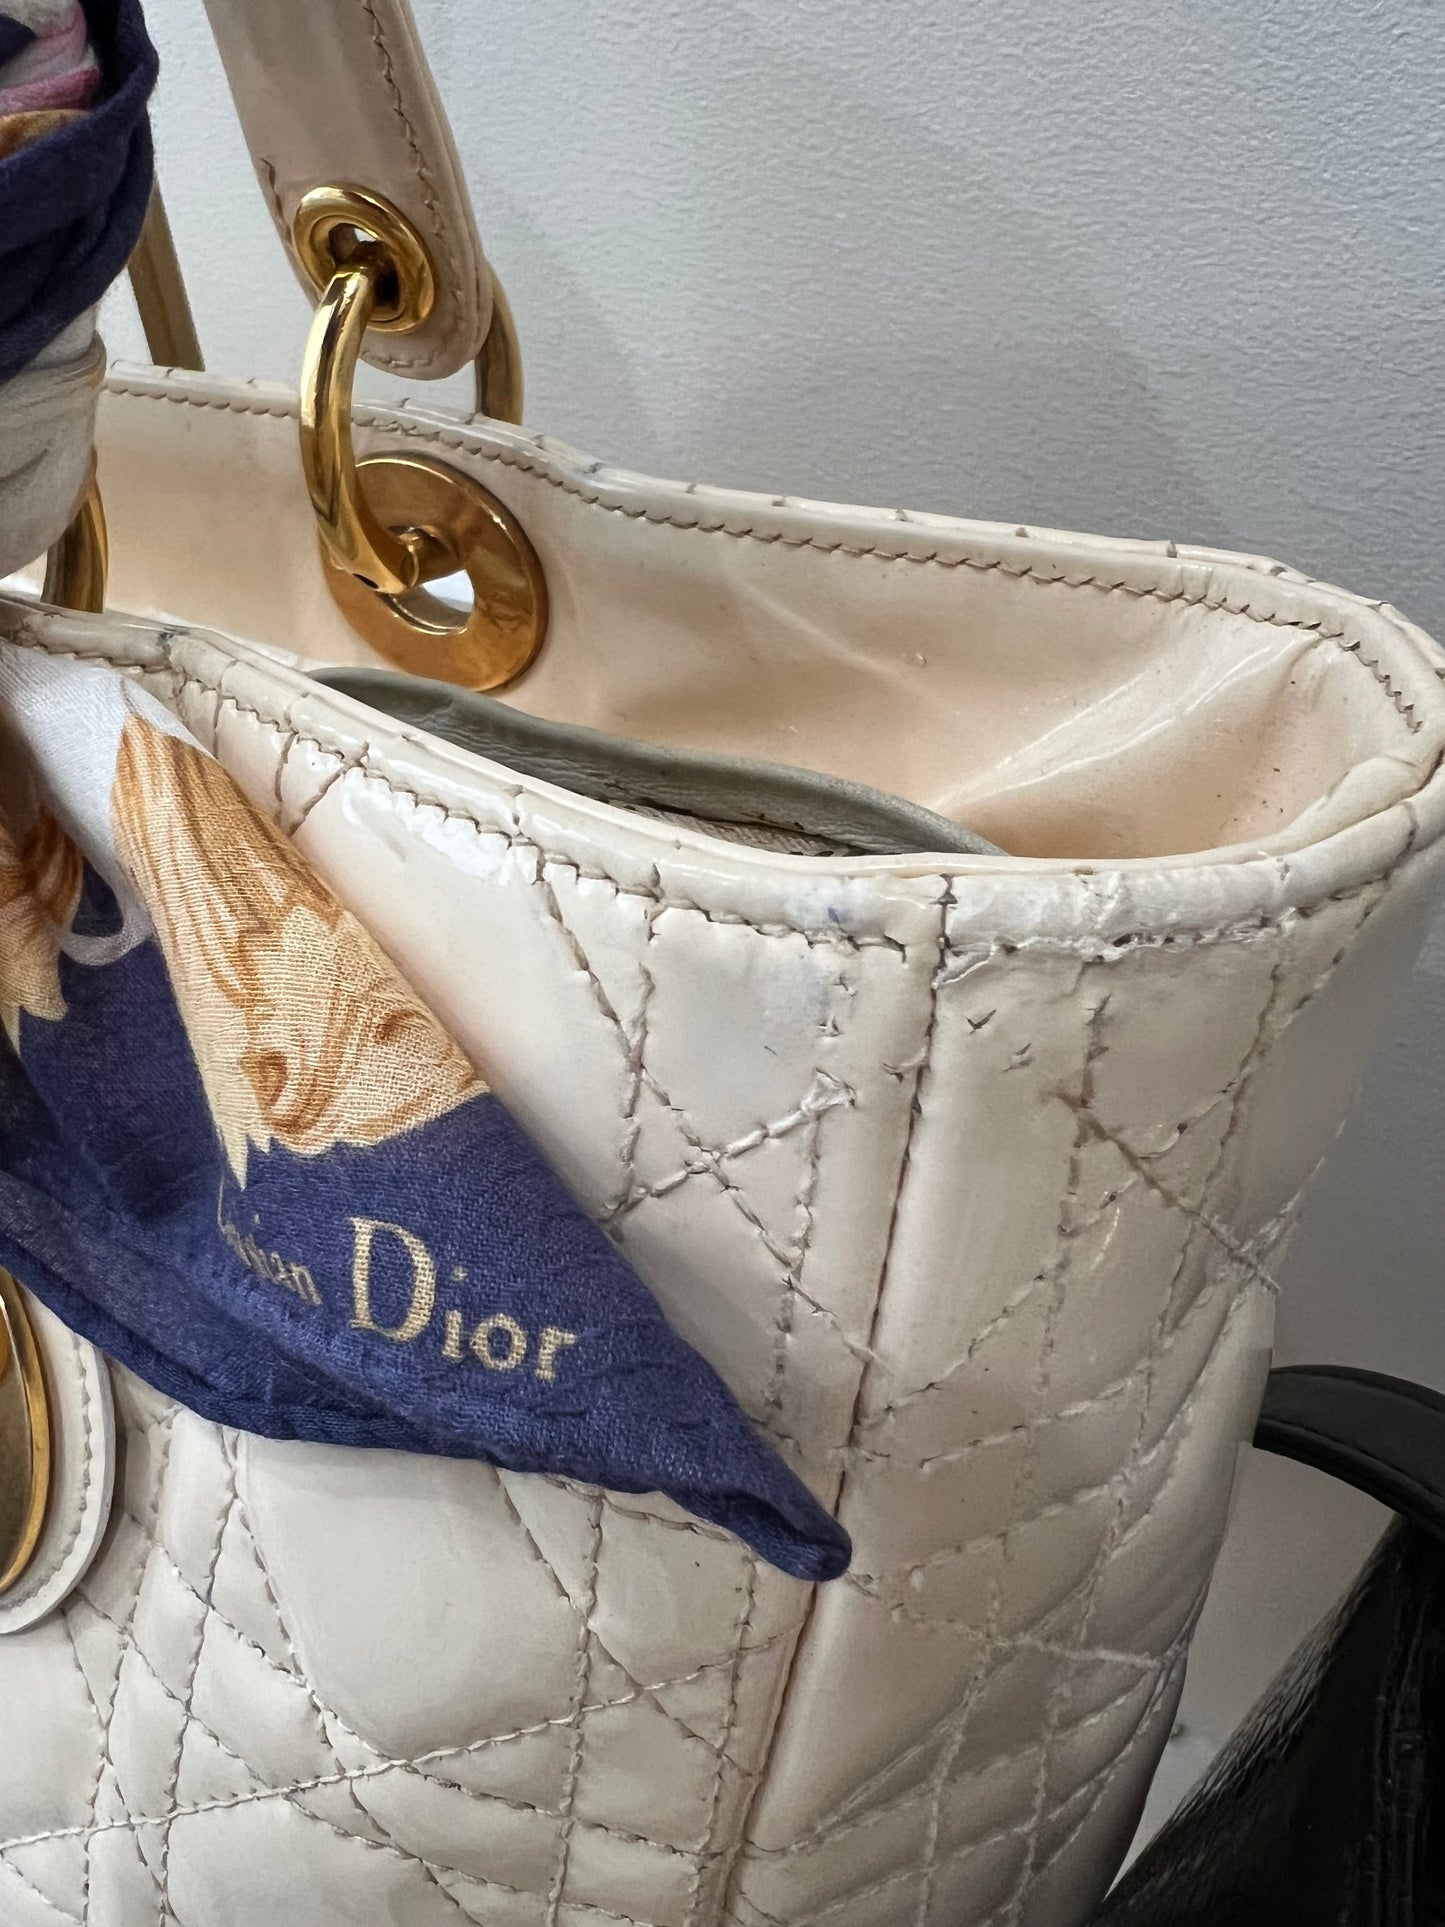 CHRISTIAN DIOR Patent Cannage Large Lady Dior Ivory